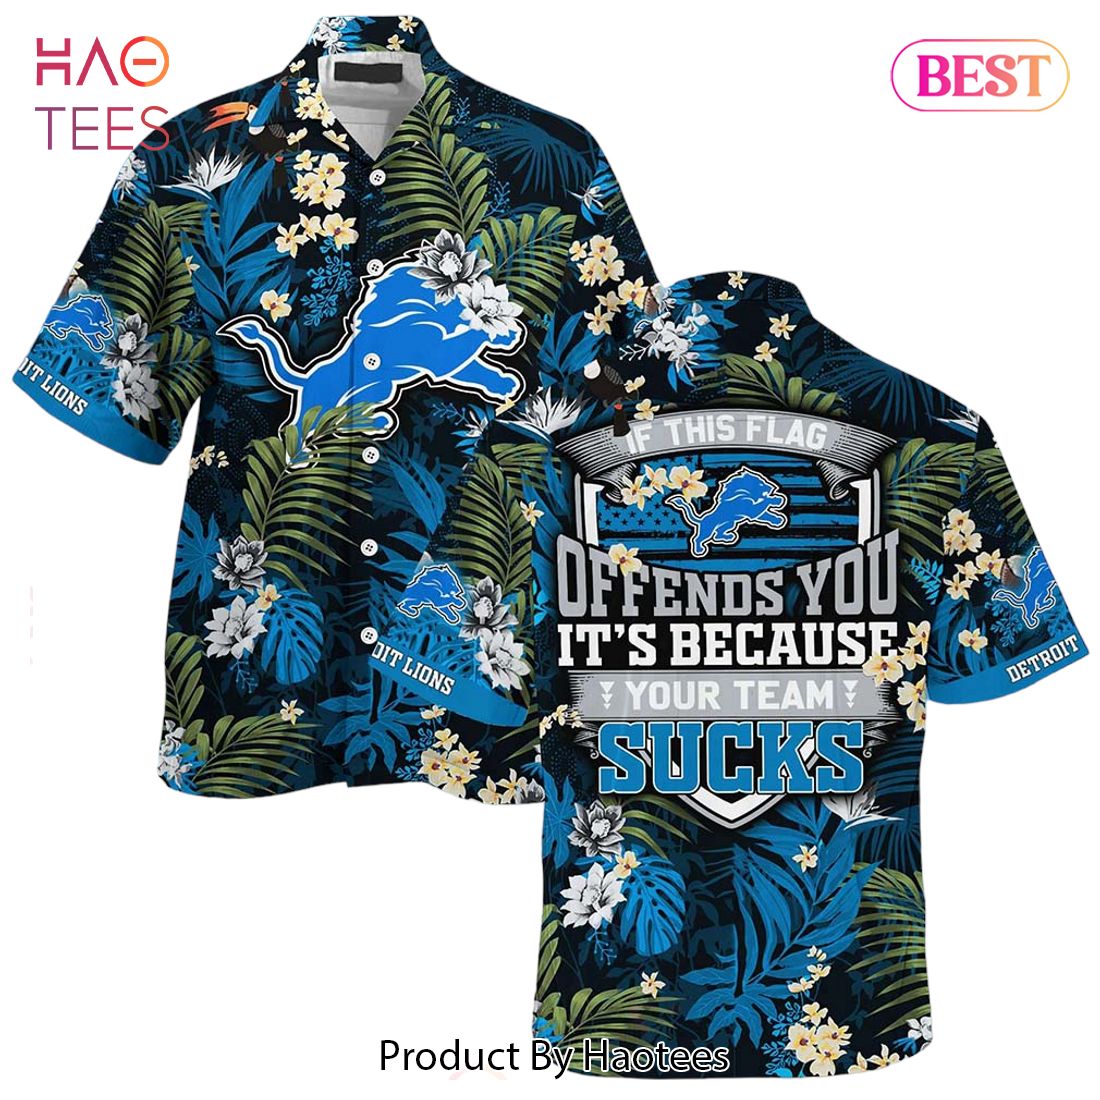 HOT TREND Detroit LionsHawaiian Shirt With Tropical Pattern If This Flag Offends You Its Because You Team Sucks